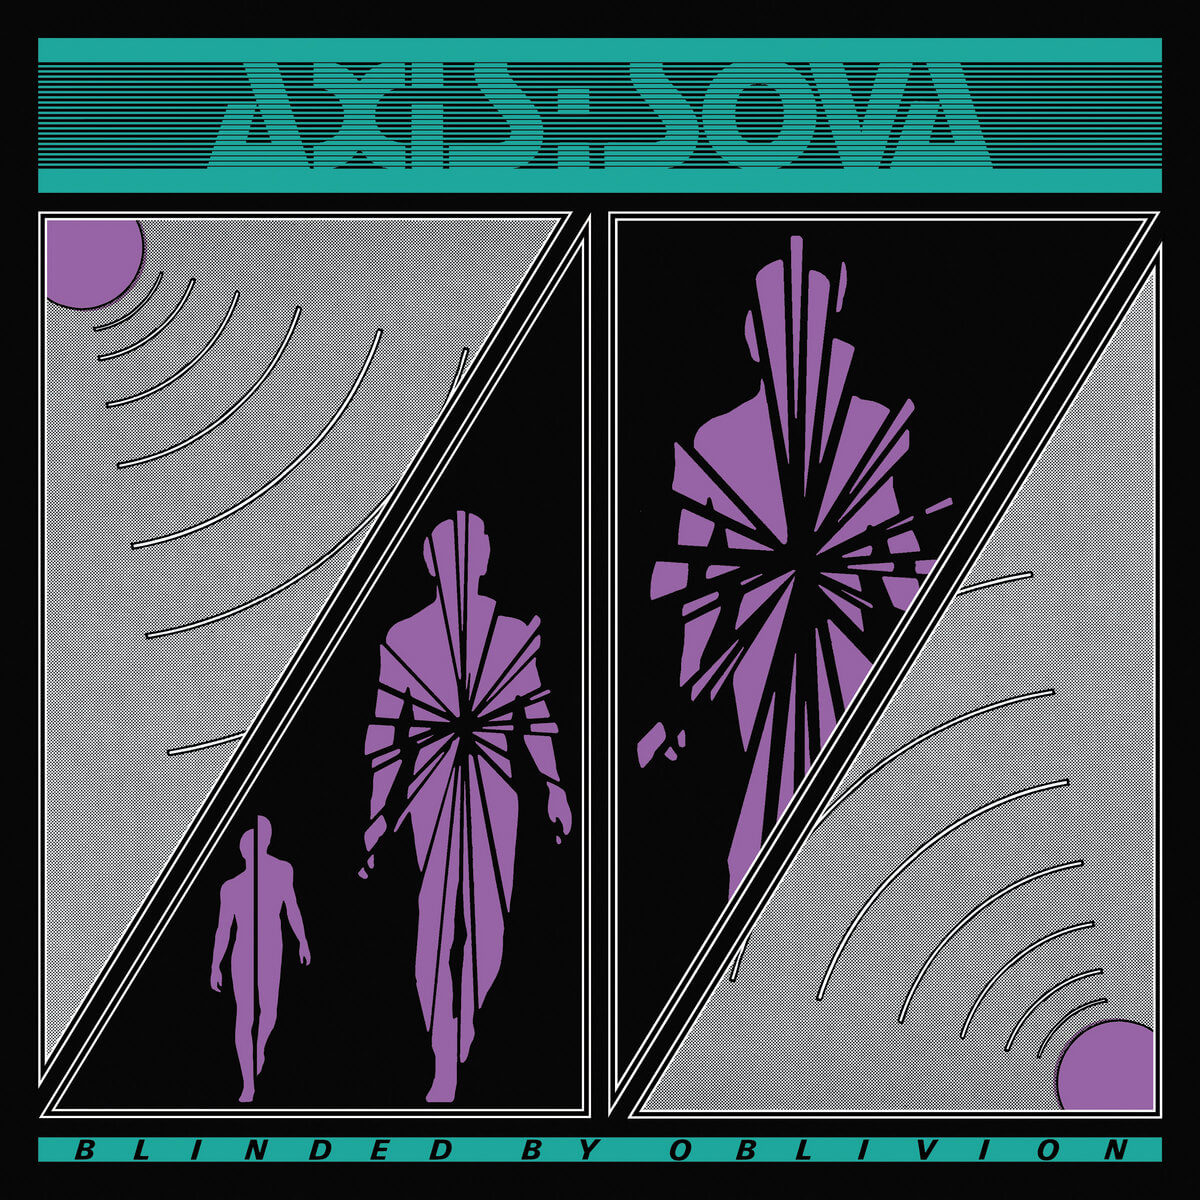 "Persuasion" By Axis: Sova is Northern Transmissions Song of the Day. The track is off the band's forthcoming album Oblivion, available 10/6